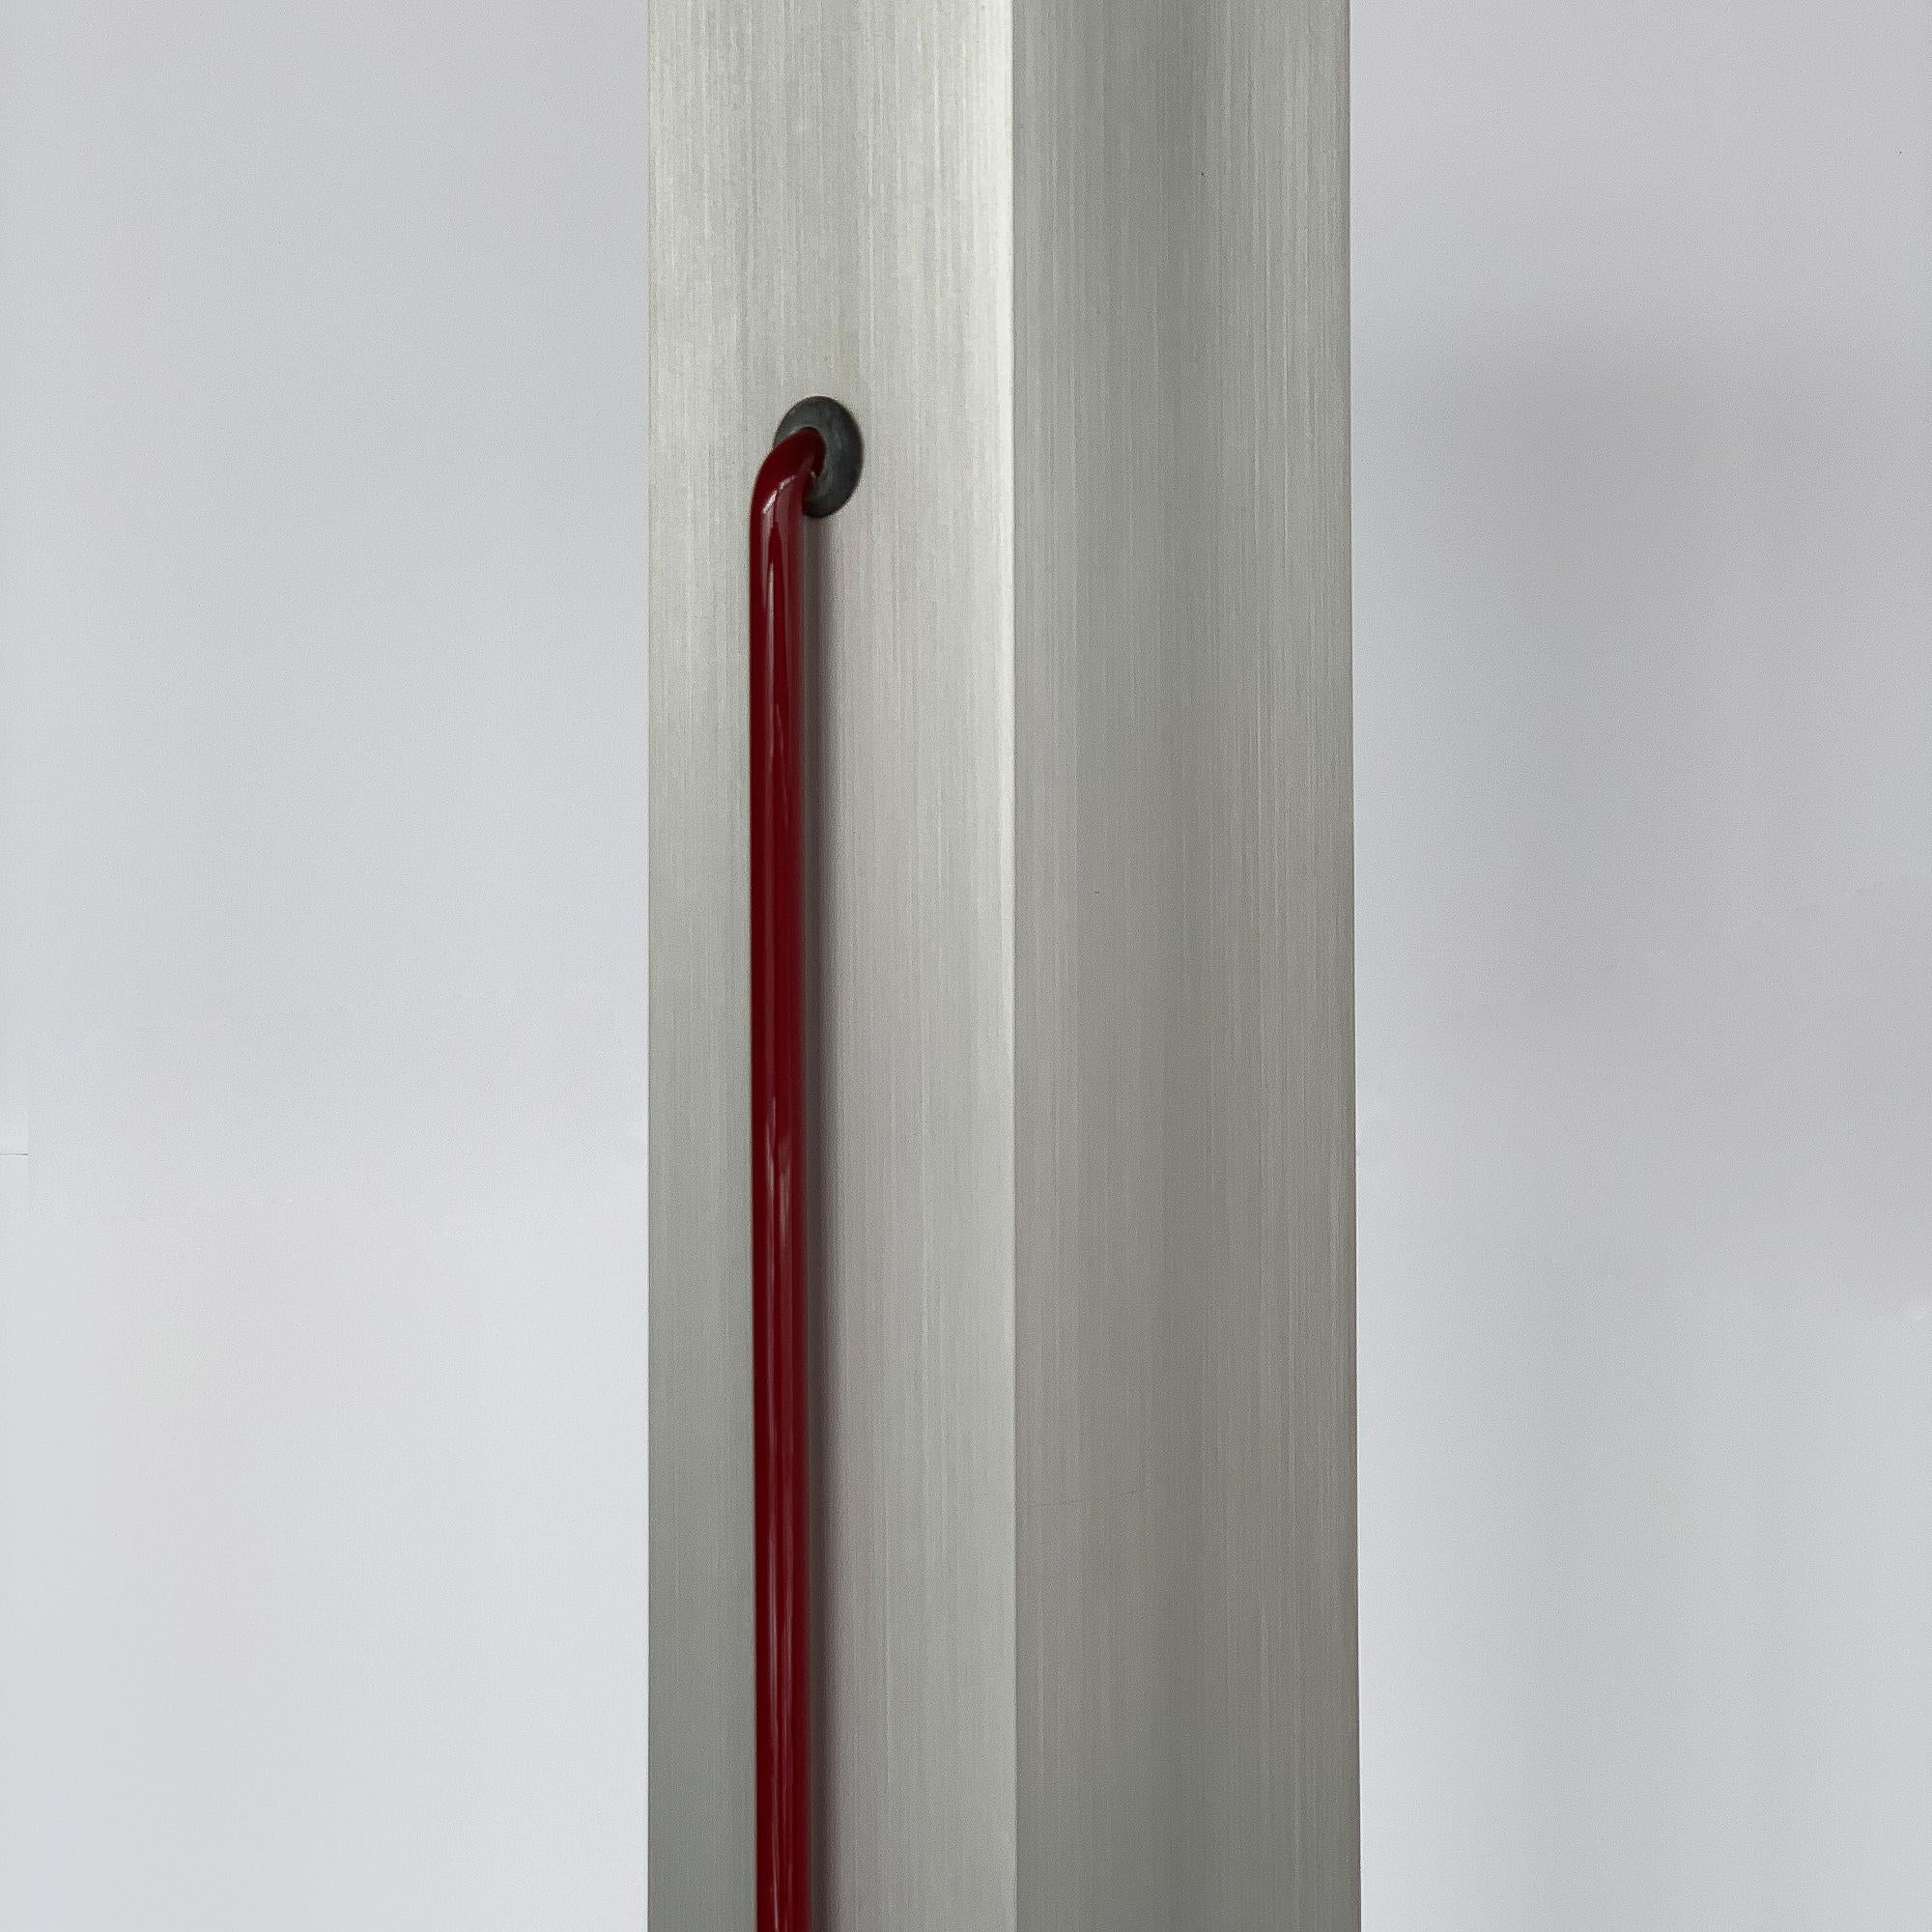 Late 20th Century Rare Red Neon and Aluminum Floor Lamp by Rudi Stern and Don Chelsea for Kovacs